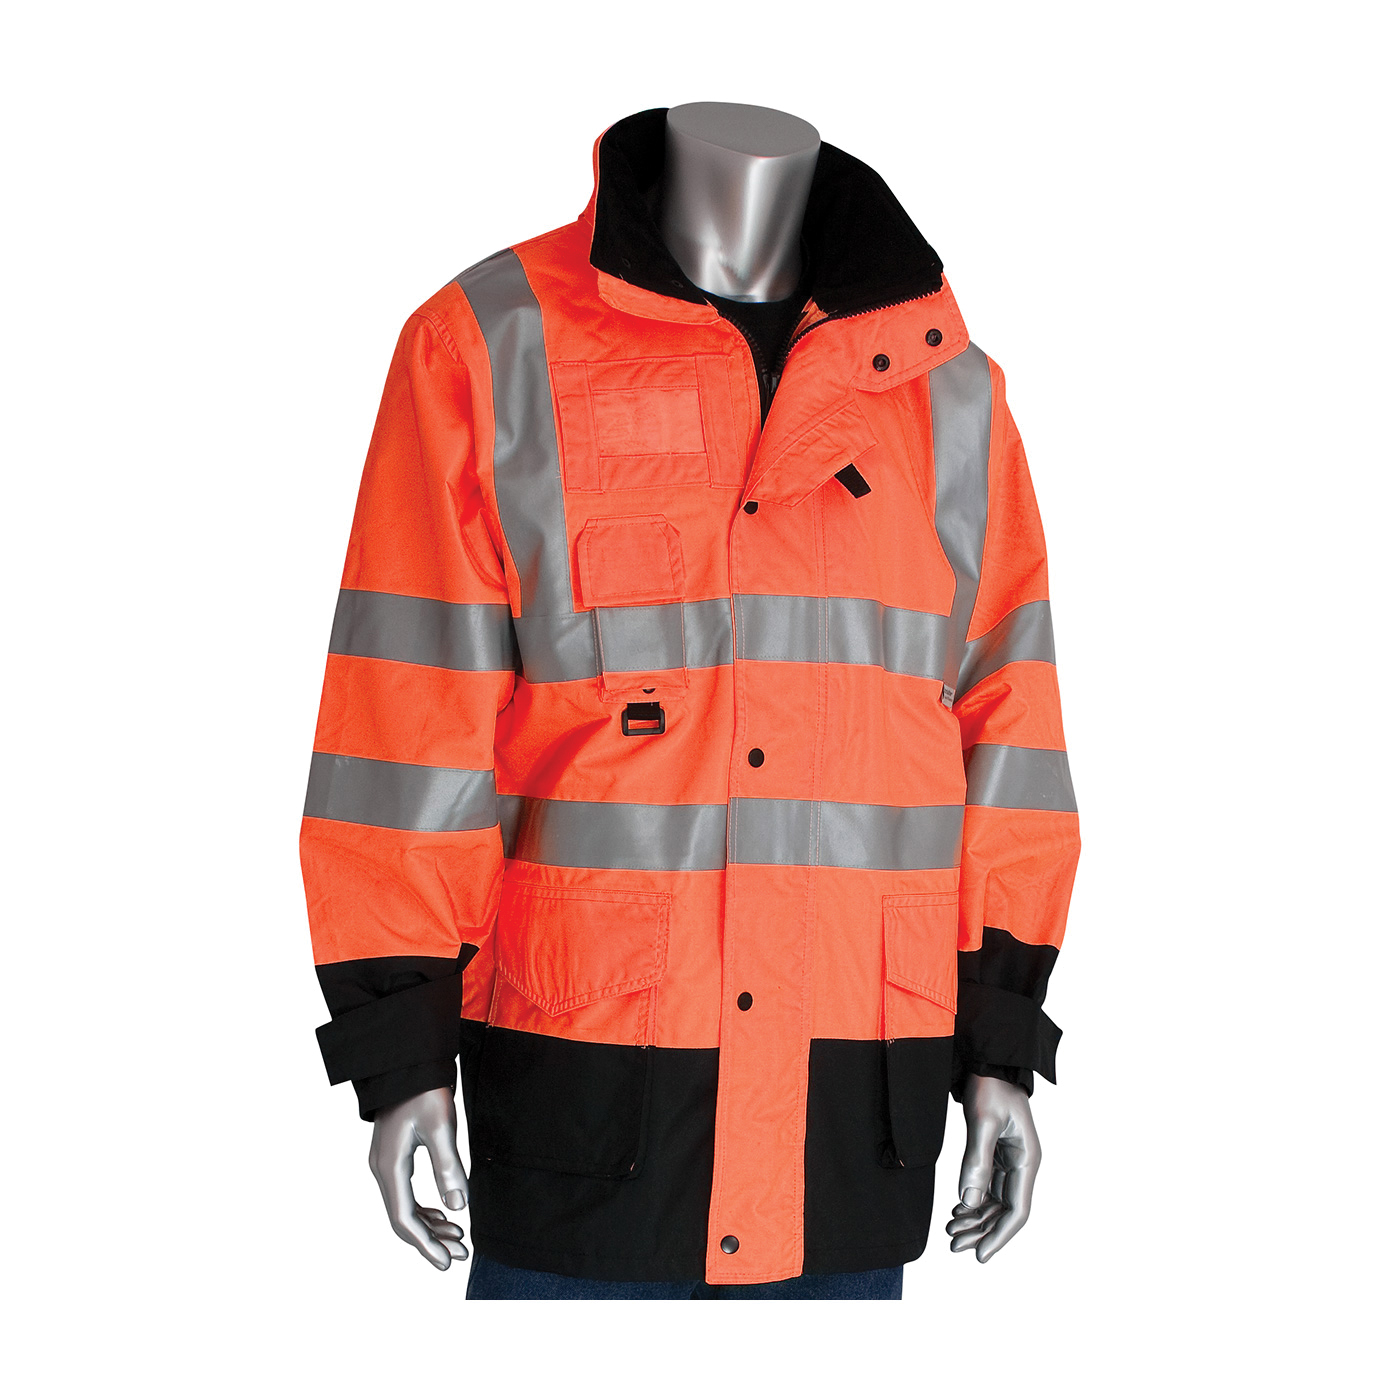 PIP® 343-1756-OR/3X 7-in-1 All Condition Winter Coat With Inner Jacket and Vest Combination, Hi-Viz Orange, Polyester, 64.4 in Chest, Resists: Water, Specifications Met: ANSI 107 Class 3 Type R